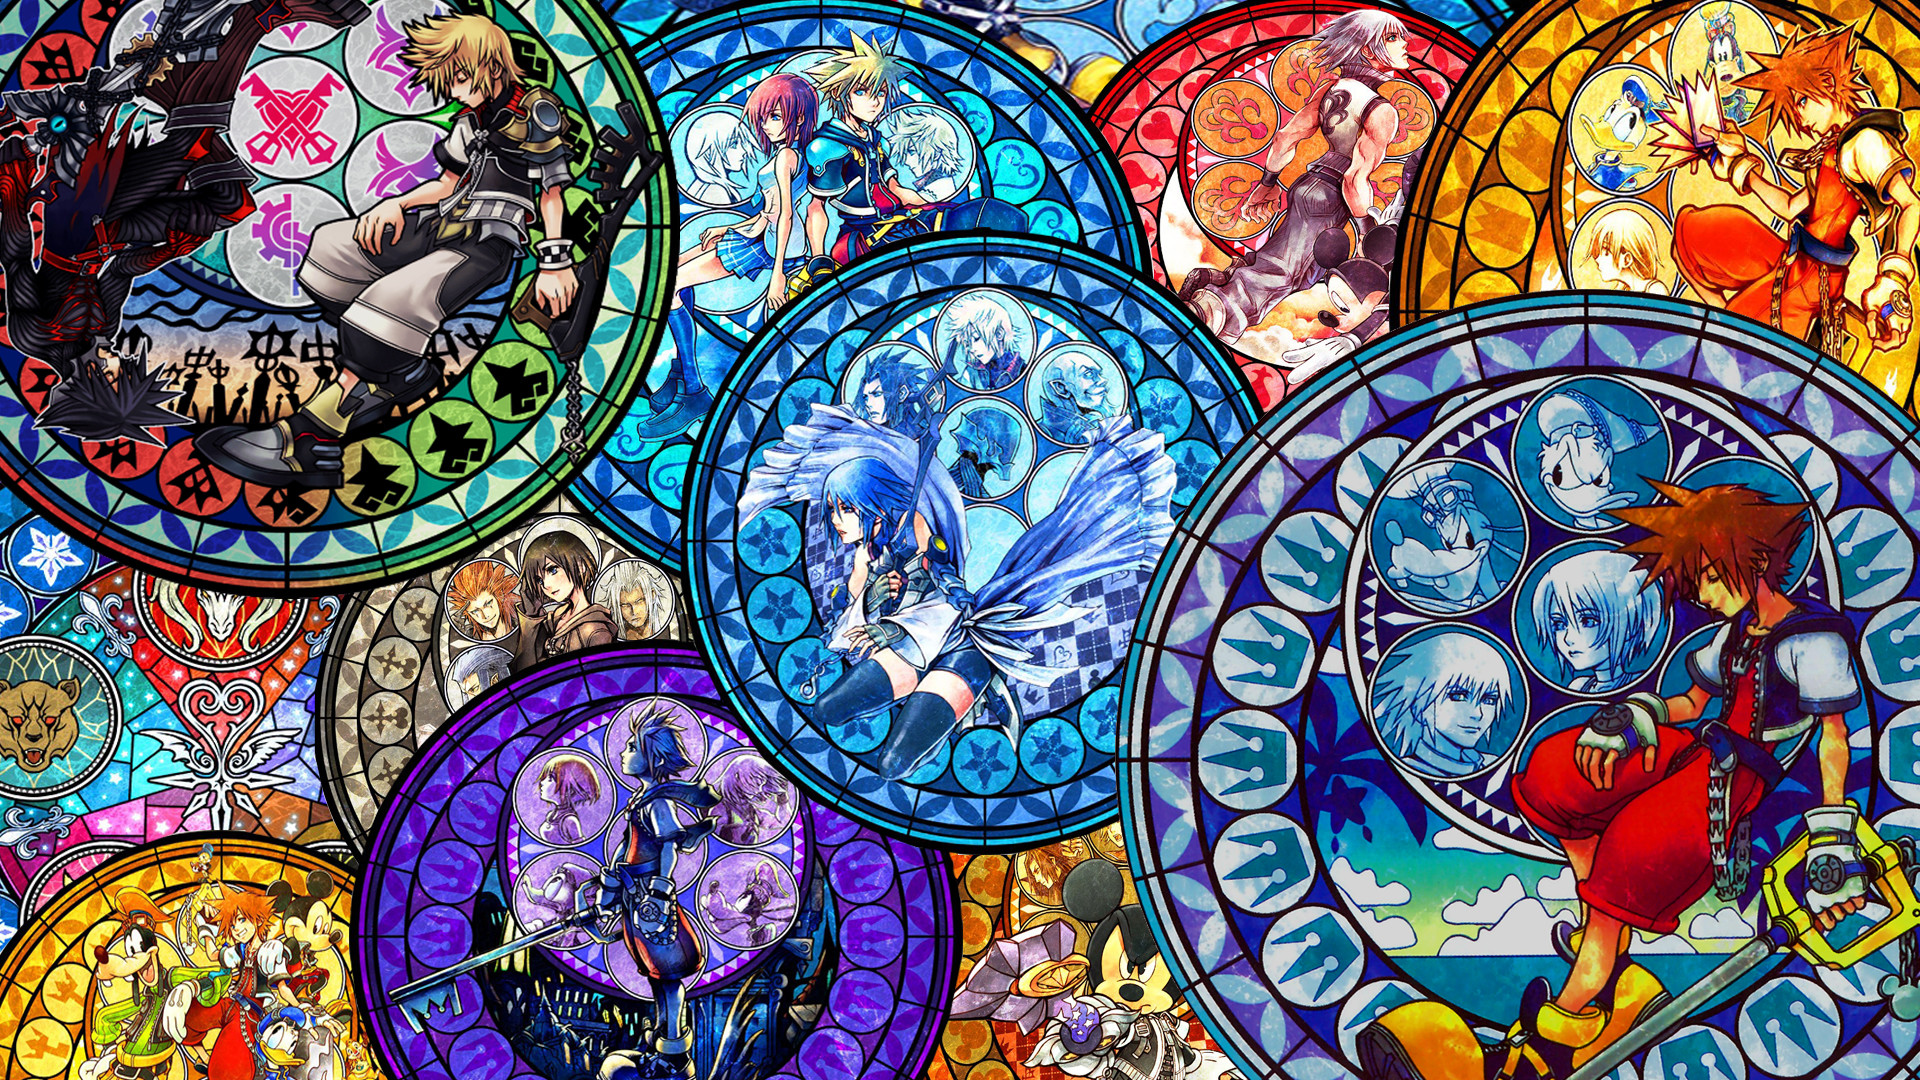 19x1080 Kingdom Hearts Stained Glass Wallpaper By Kingdom Hearts Wallpaper Stained Glass 19x1080 Wallpaper Teahub Io